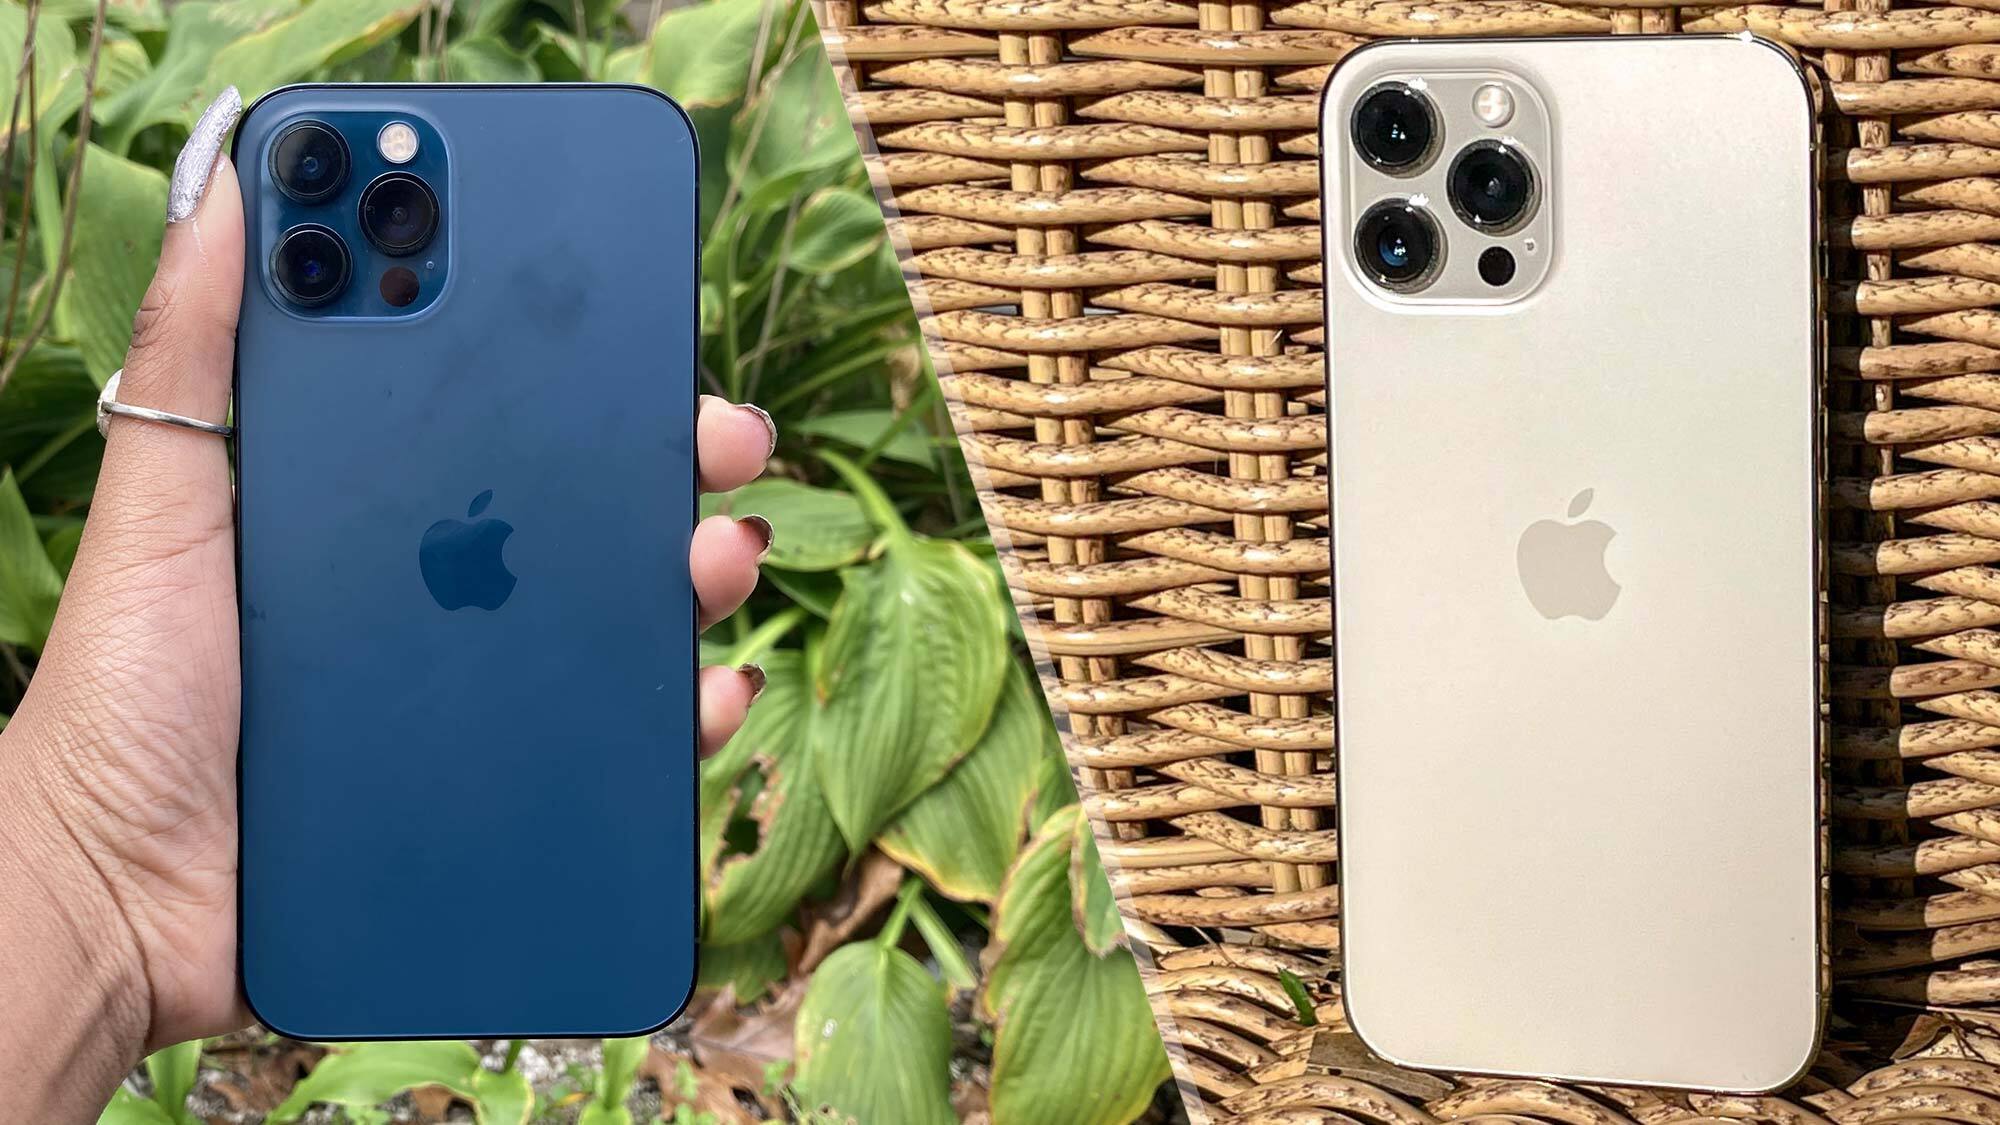 iPhone 12 Pro Models Have 6GB of RAM, iPhone 12 and 12 Mini Remain